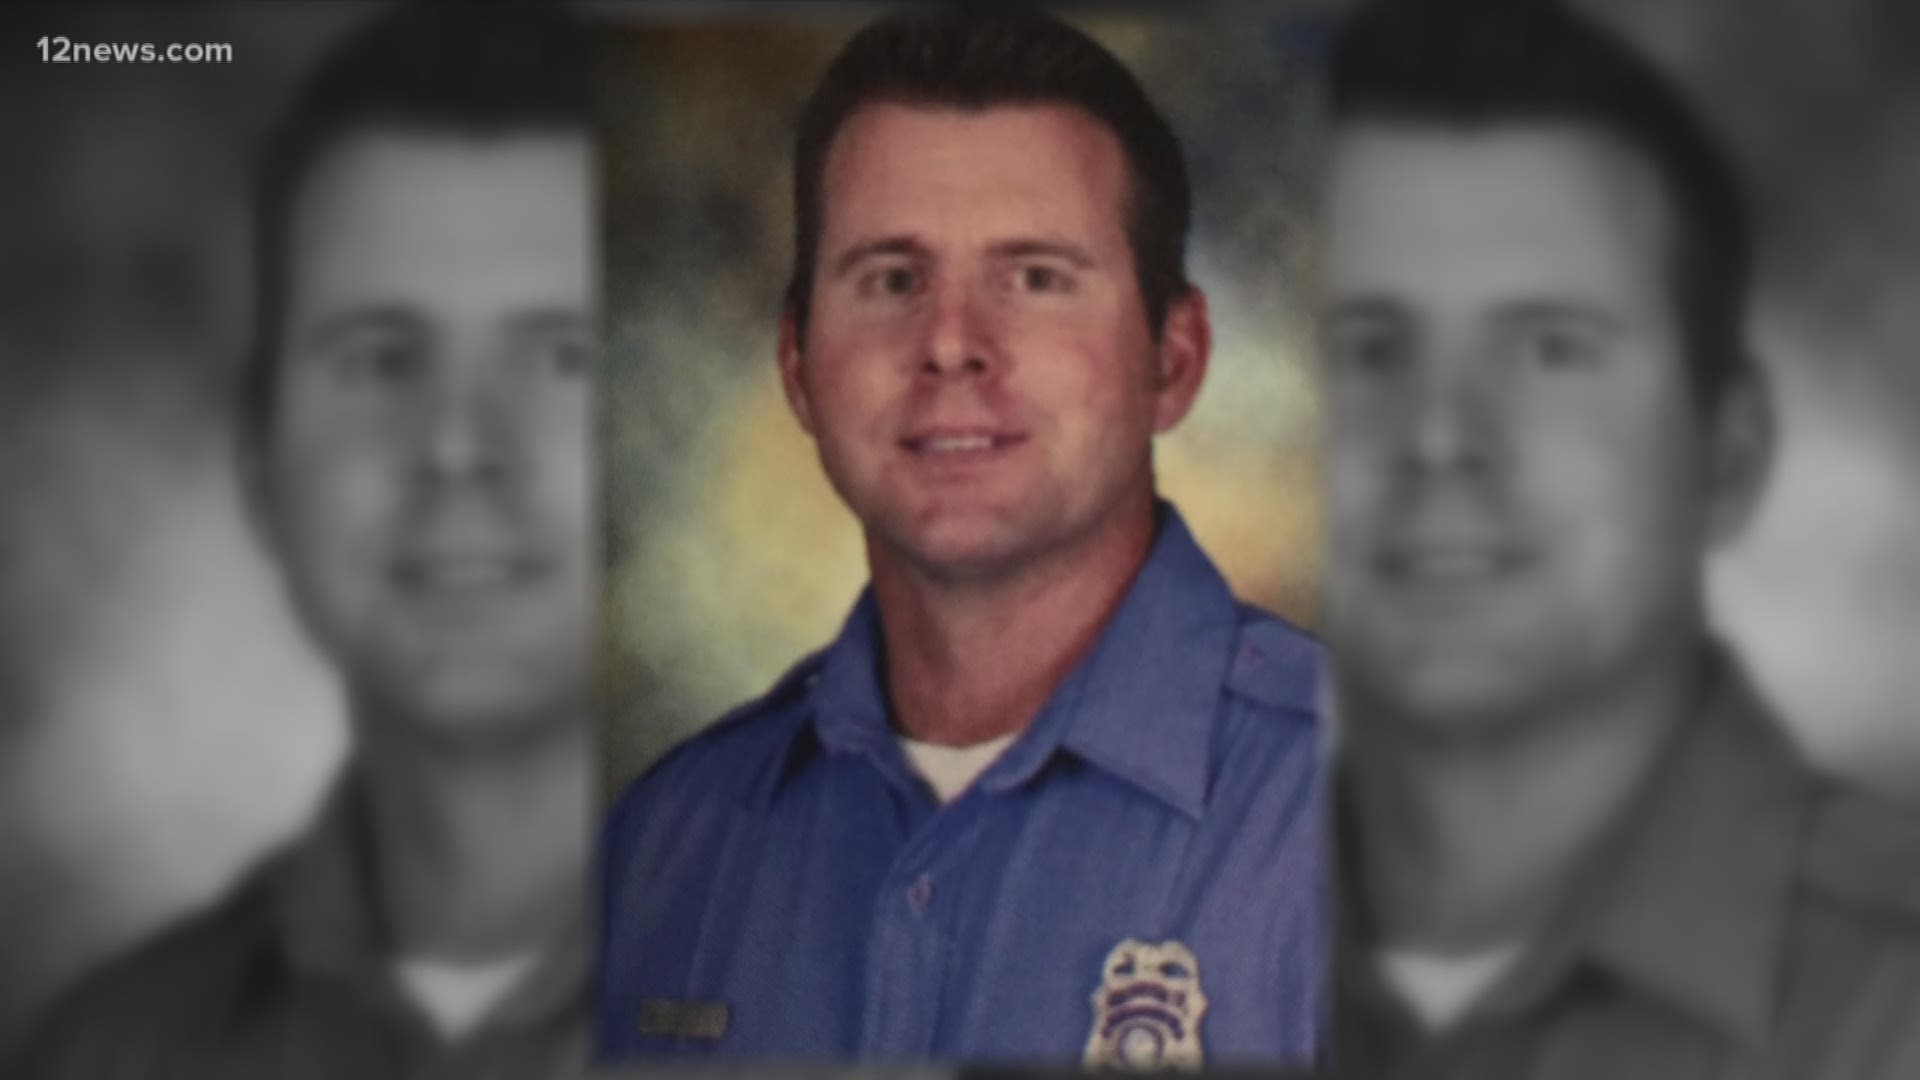 Justin Doherty, a decorated Phoenix firefighter, was found dead in his barracks back in July. Today we learned his cause of death was an accidental overdose.